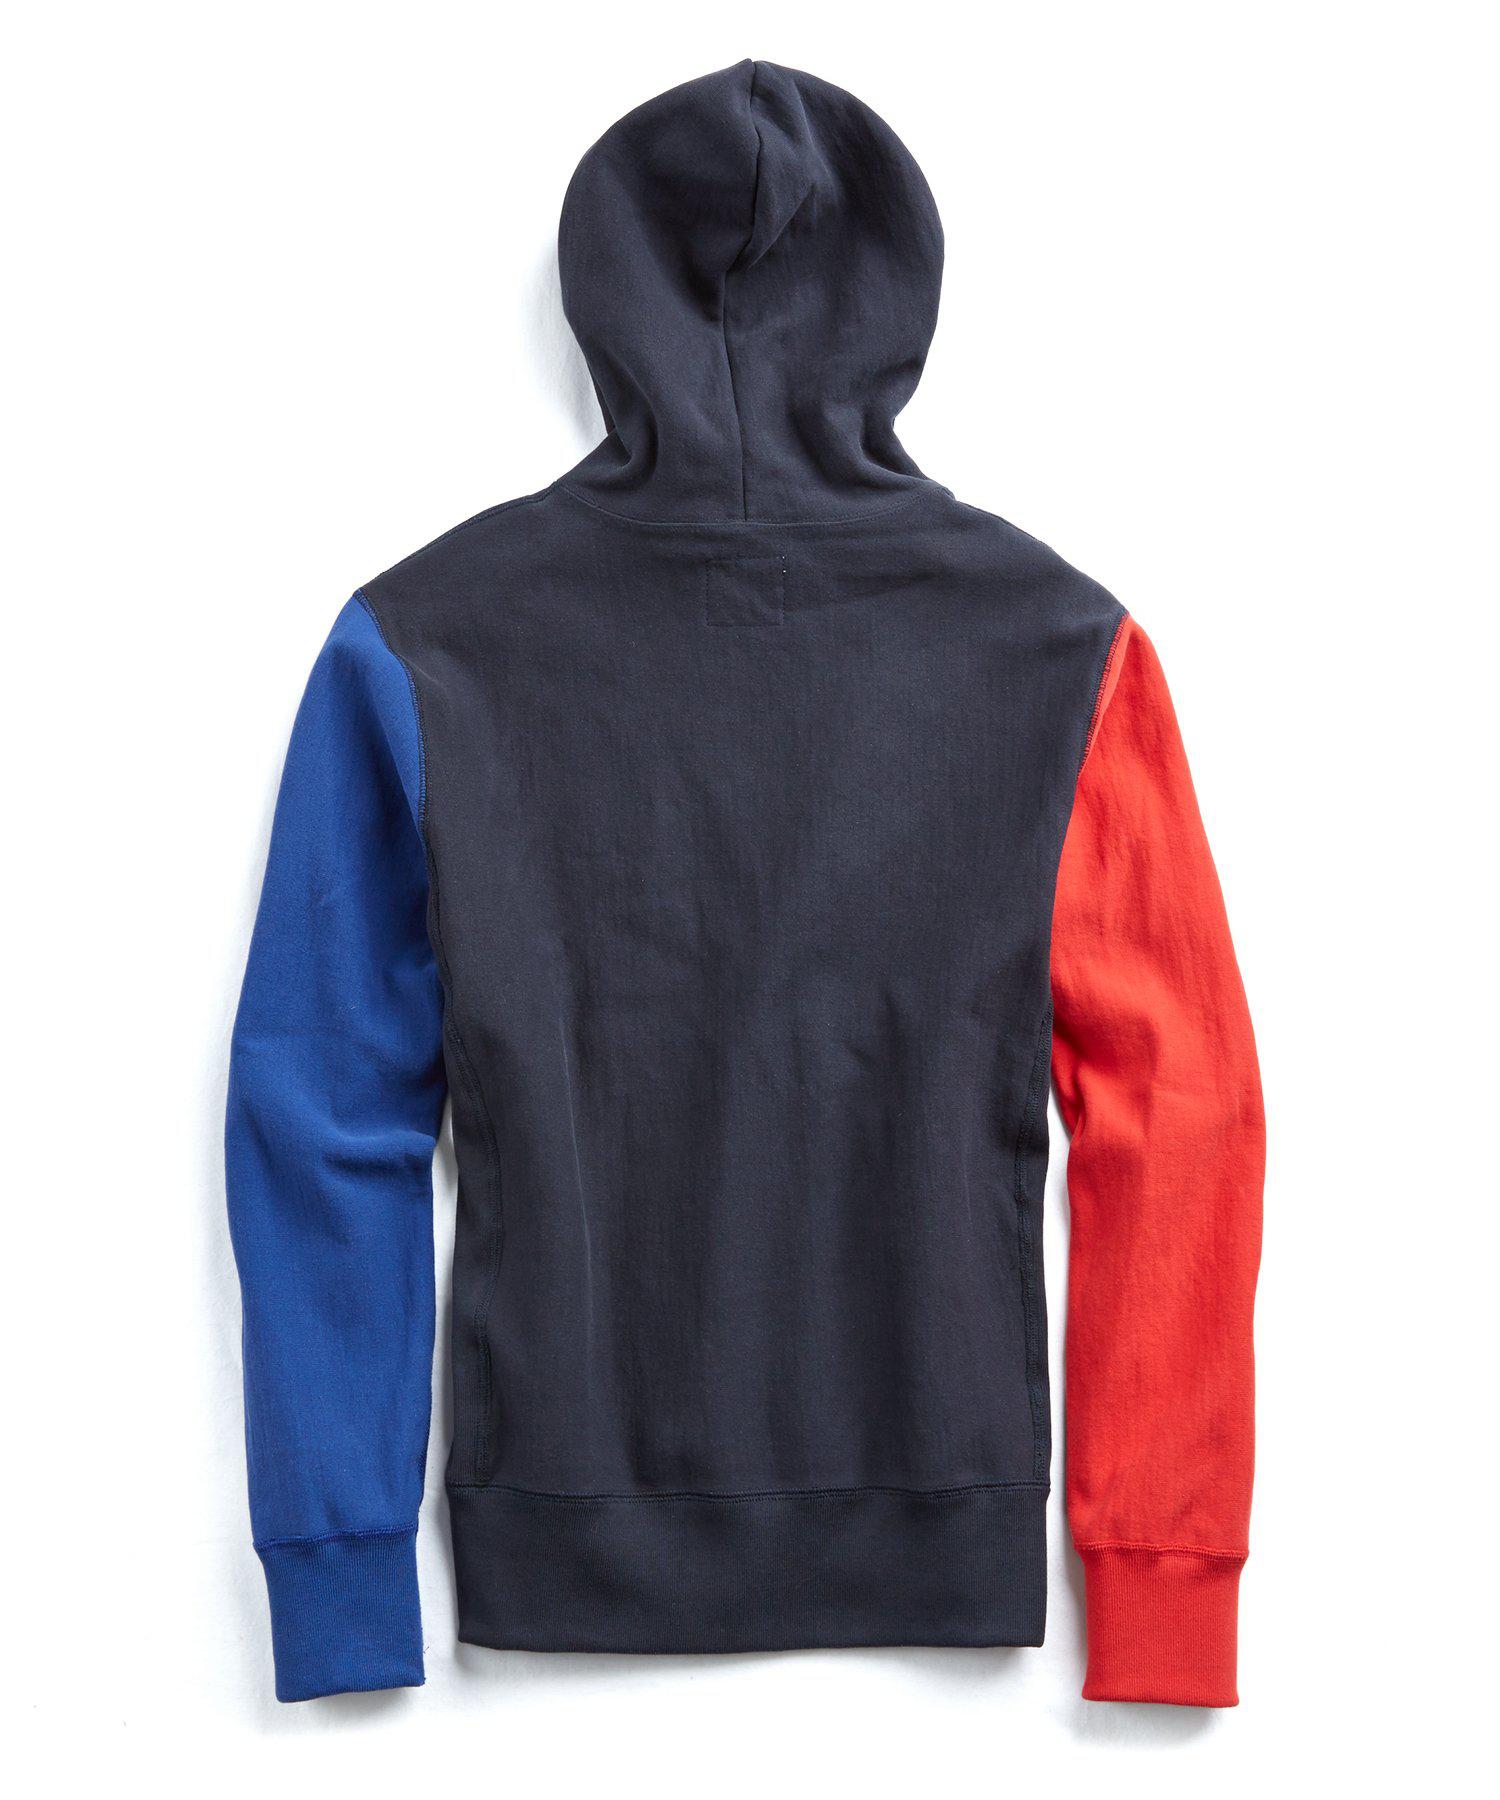 red white and blue champion sweater